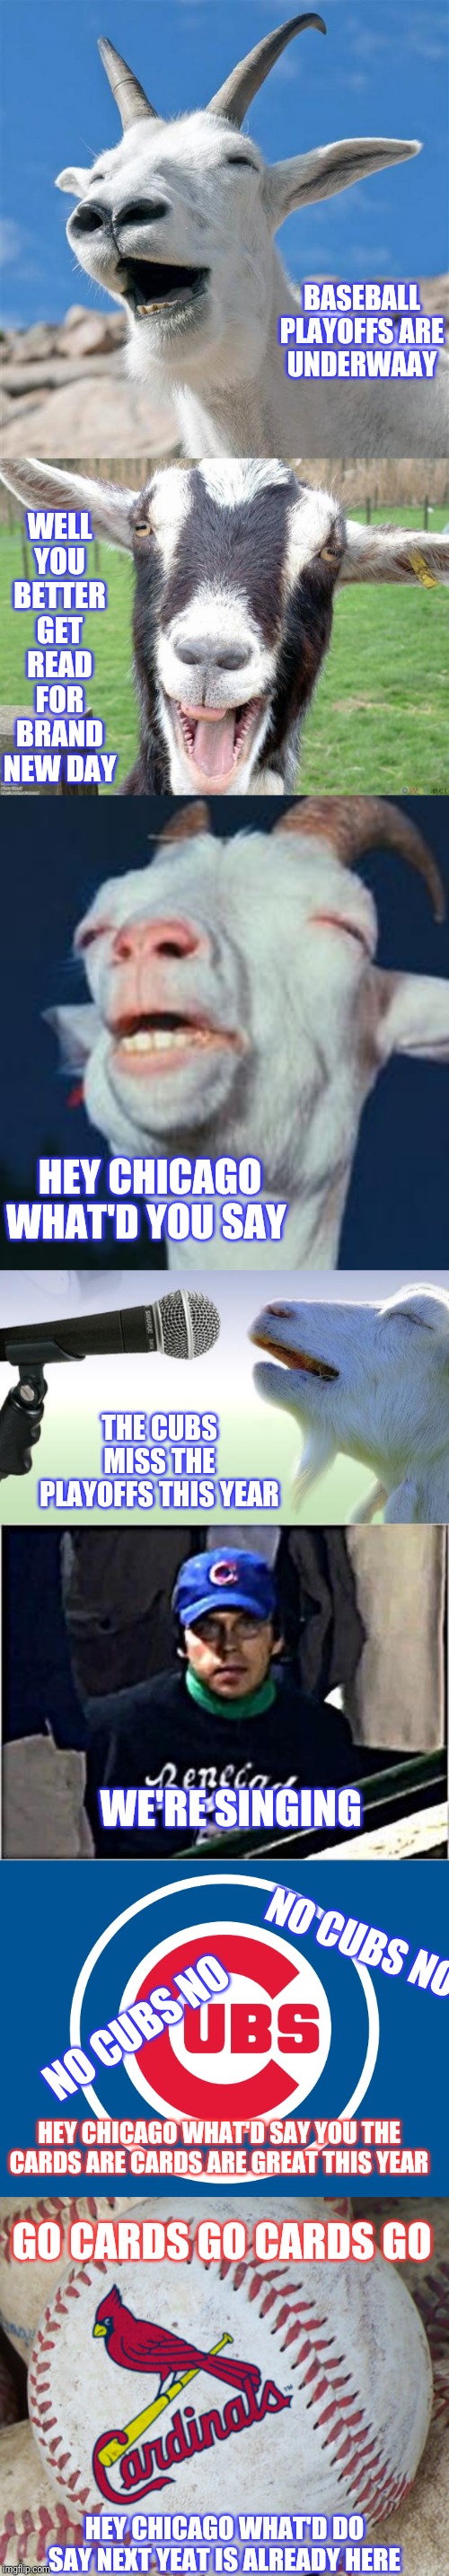 If you guys heard the song "Go Cubs Go" you'll understand. Also need to follow baseball | BASEBALL PLAYOFFS ARE UNDERWAAY; WELL YOU BETTER GET READ FOR BRAND NEW DAY; HEY CHICAGO WHAT'D YOU SAY; THE CUBS MISS THE PLAYOFFS THIS YEAR; WE'RE SINGING; NO CUBS NO; NO CUBS NO; HEY CHICAGO WHAT'D SAY YOU THE CARDS ARE CARDS ARE GREAT THIS YEAR; GO CARDS GO CARDS GO; HEY CHICAGO WHAT'D DO SAY NEXT YEAT IS ALREADY HERE | image tagged in goat,memes,laughing goat,funny goat,goat singing,steve bartman | made w/ Imgflip meme maker